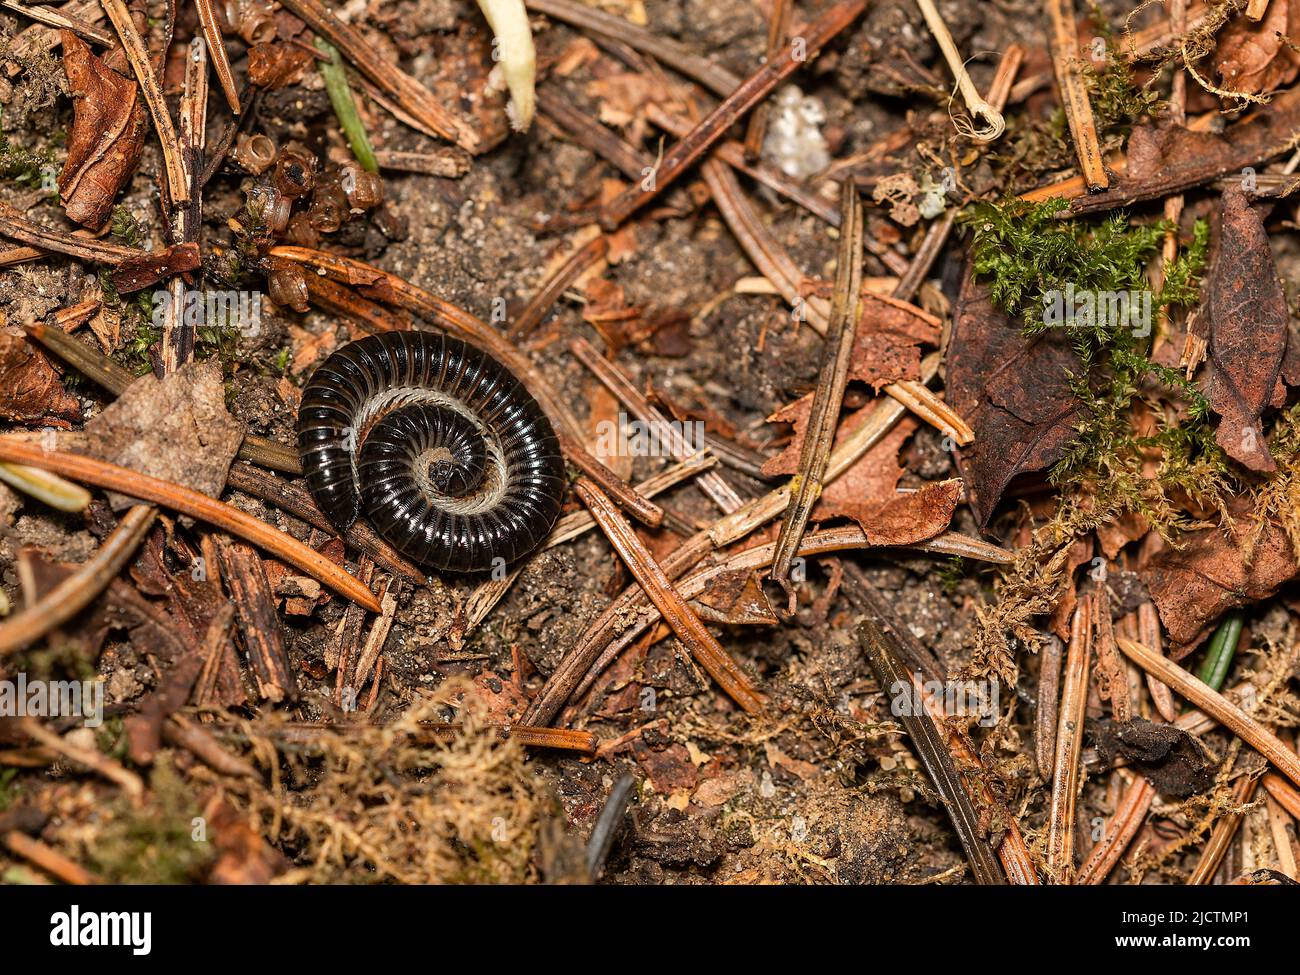 A resting Milliped found under a piece of old discarded wood in a Norfolk garden UK. Stock Photo